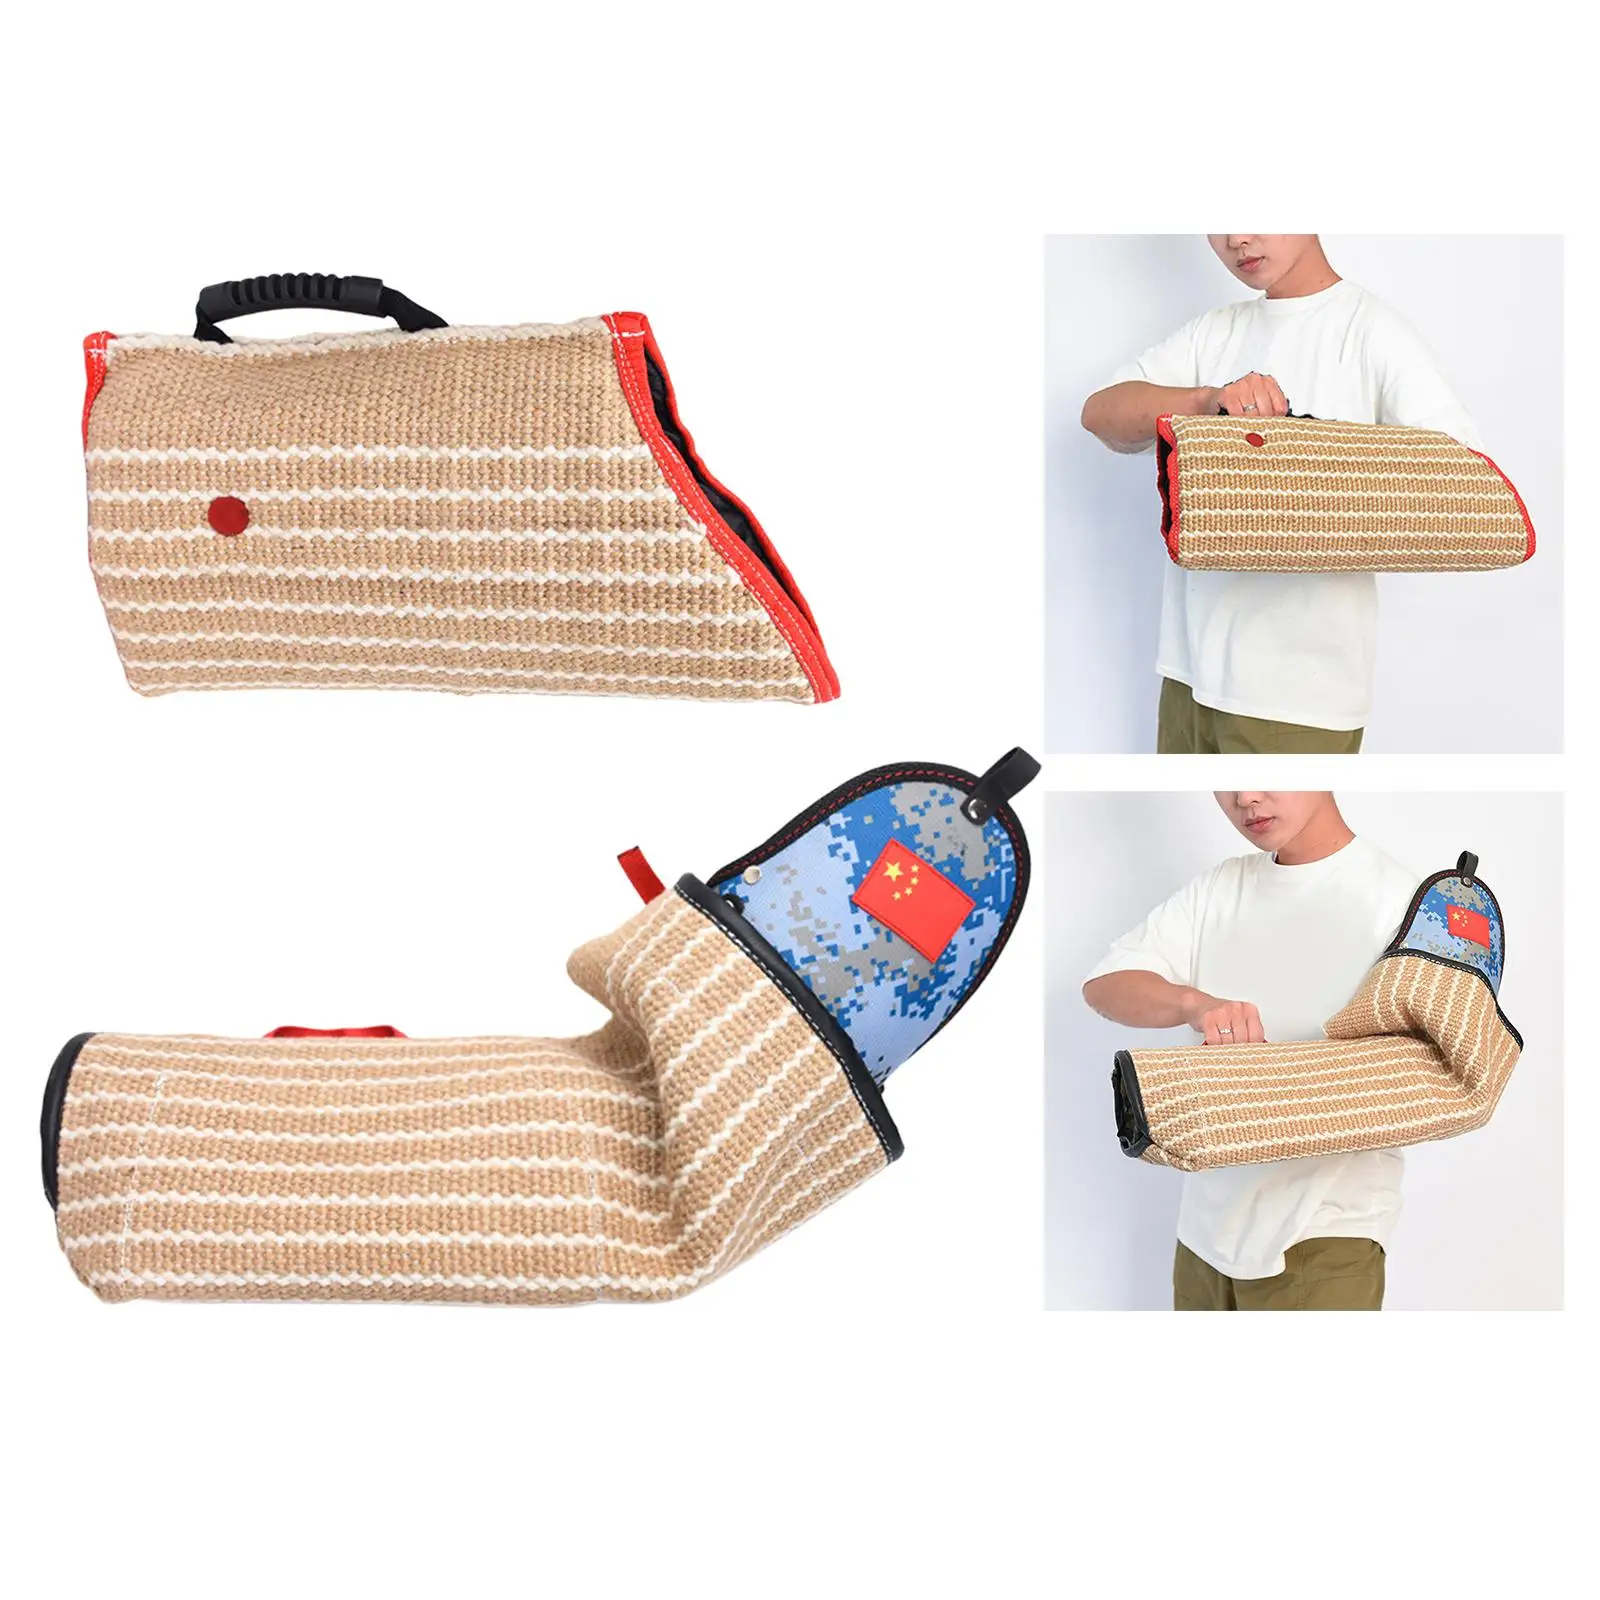 Professional Dog Bite Training Set Dog Bite Arm Cover Tugs for Dogs Training Protection for Pitbull German Puppy Supplies